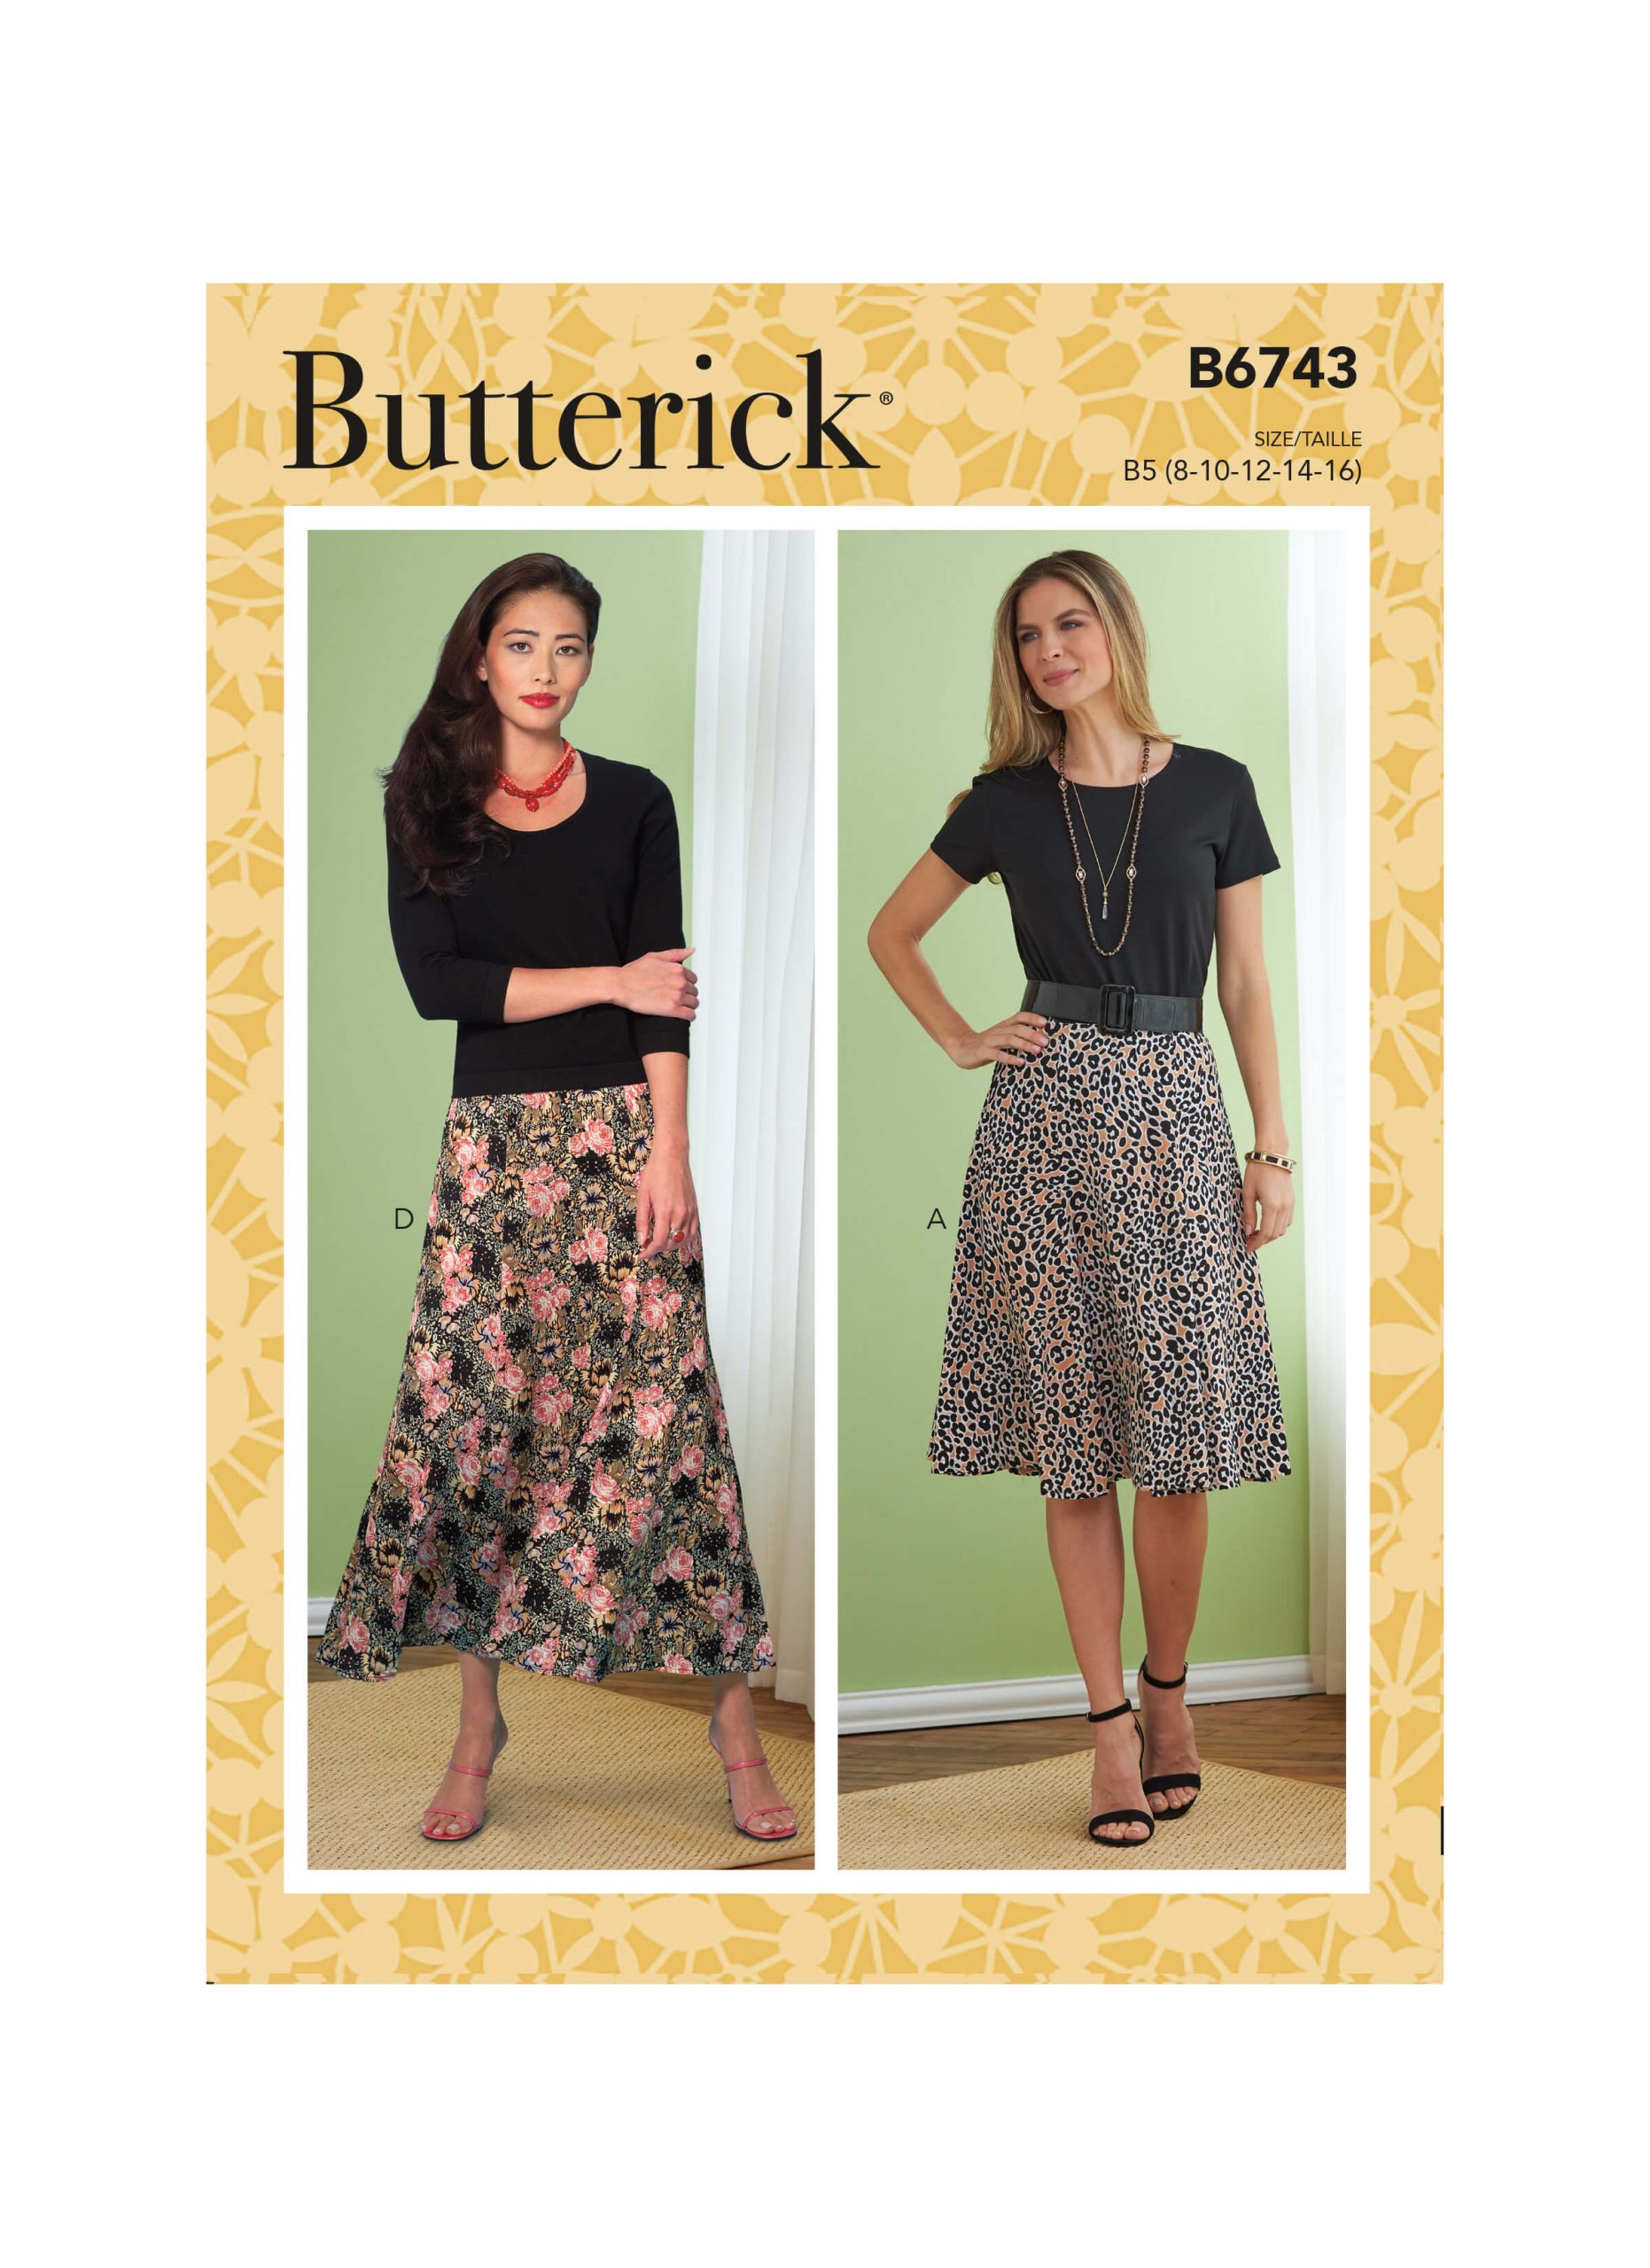 Butterick Sewing Pattern B6743 Misses'/Misses' Petite Gored Skirts